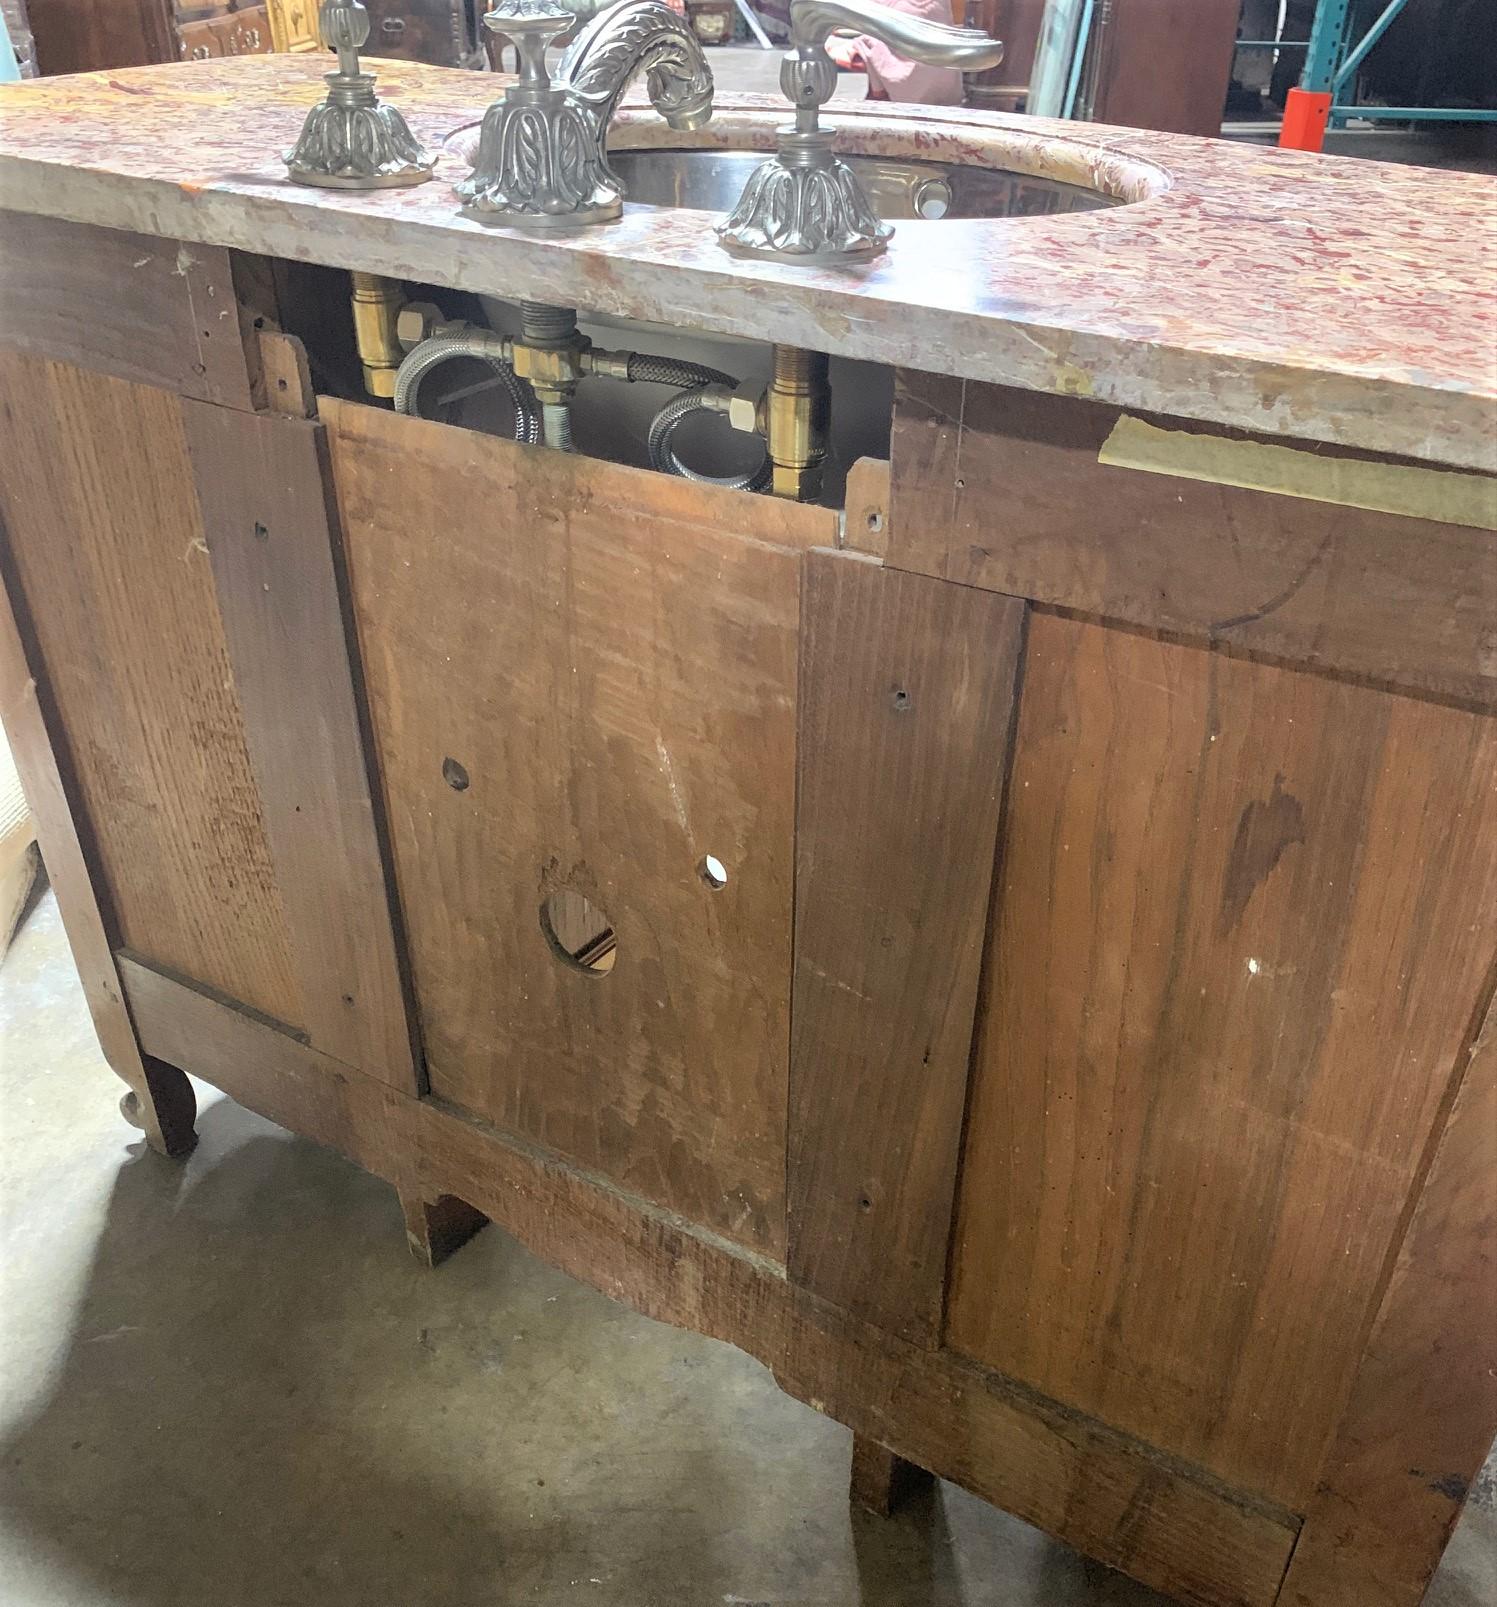 Polished 19th Century French Cherrywood and Marble-Top Bathroom Vanity